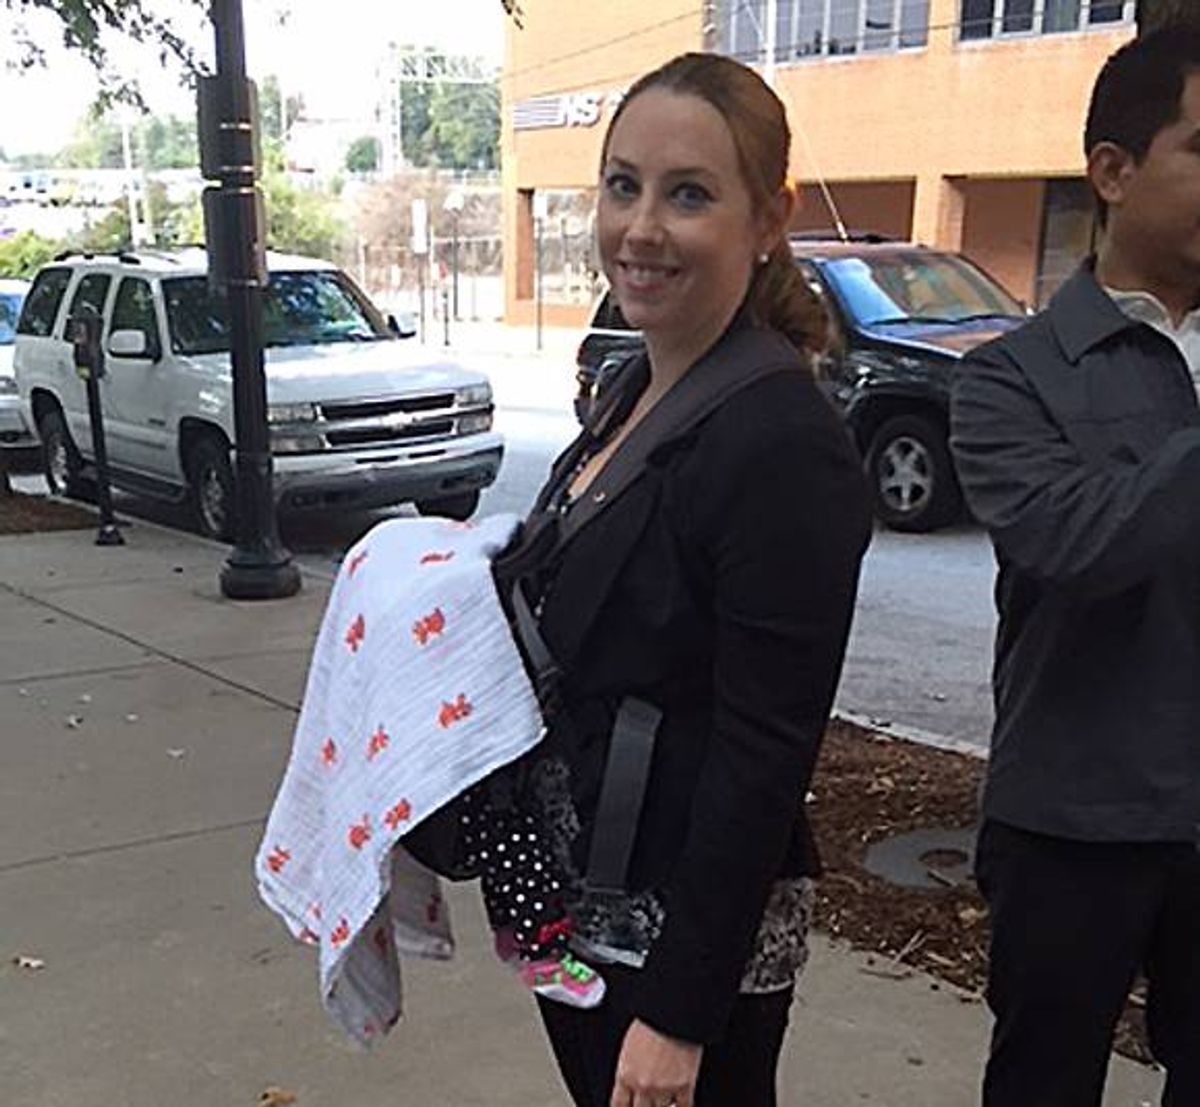 In this Oct 7, 2014 photo released by Stacy Ehrisman-Mickle, Ehrisman-Mickle poses for a photo with her daughter, in Atlanta. Ehrisman-Mickle, an immigration lawyer, brought her 4-week-old baby to court after Immigration Judge J. Dan Pelletier Sr. denied her request to delay a hearing that fell during her maternity leave. During the hearing, her baby began to cry, and Pelletier scolded her for inappropriate behavior. (AP)